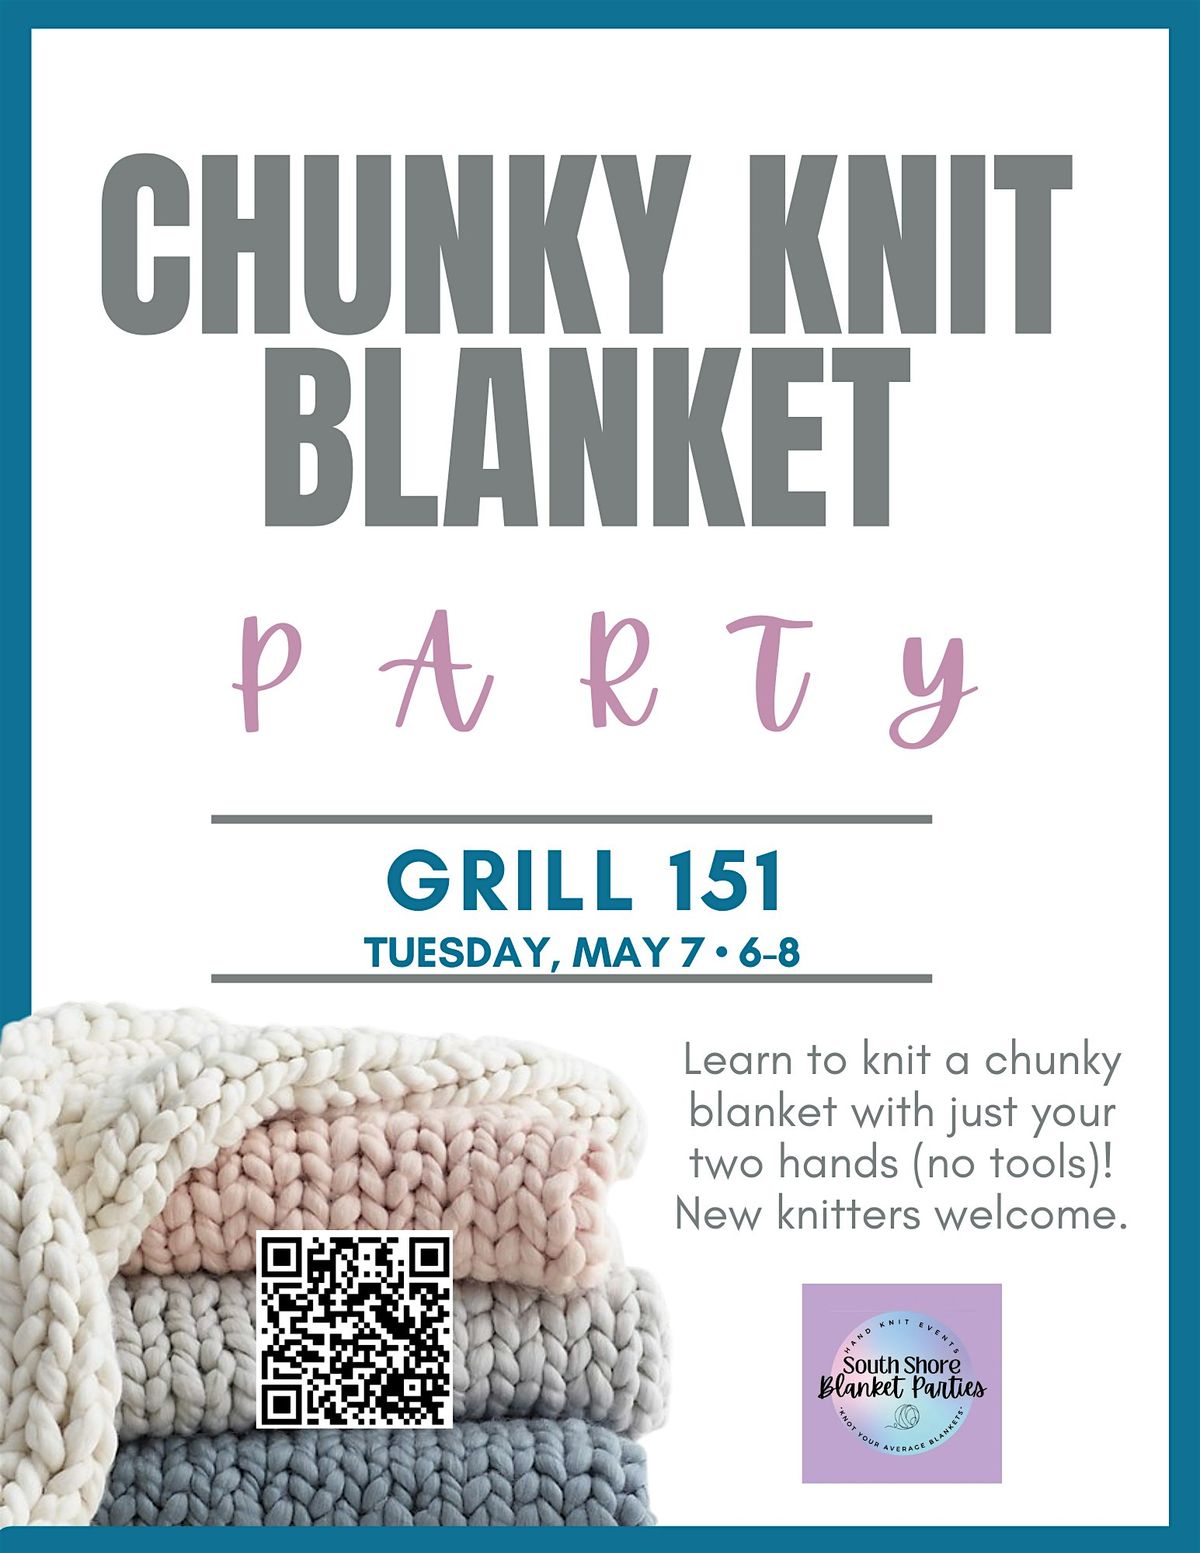 Chunky Knit Blanket Party - Grill 151 5\/7